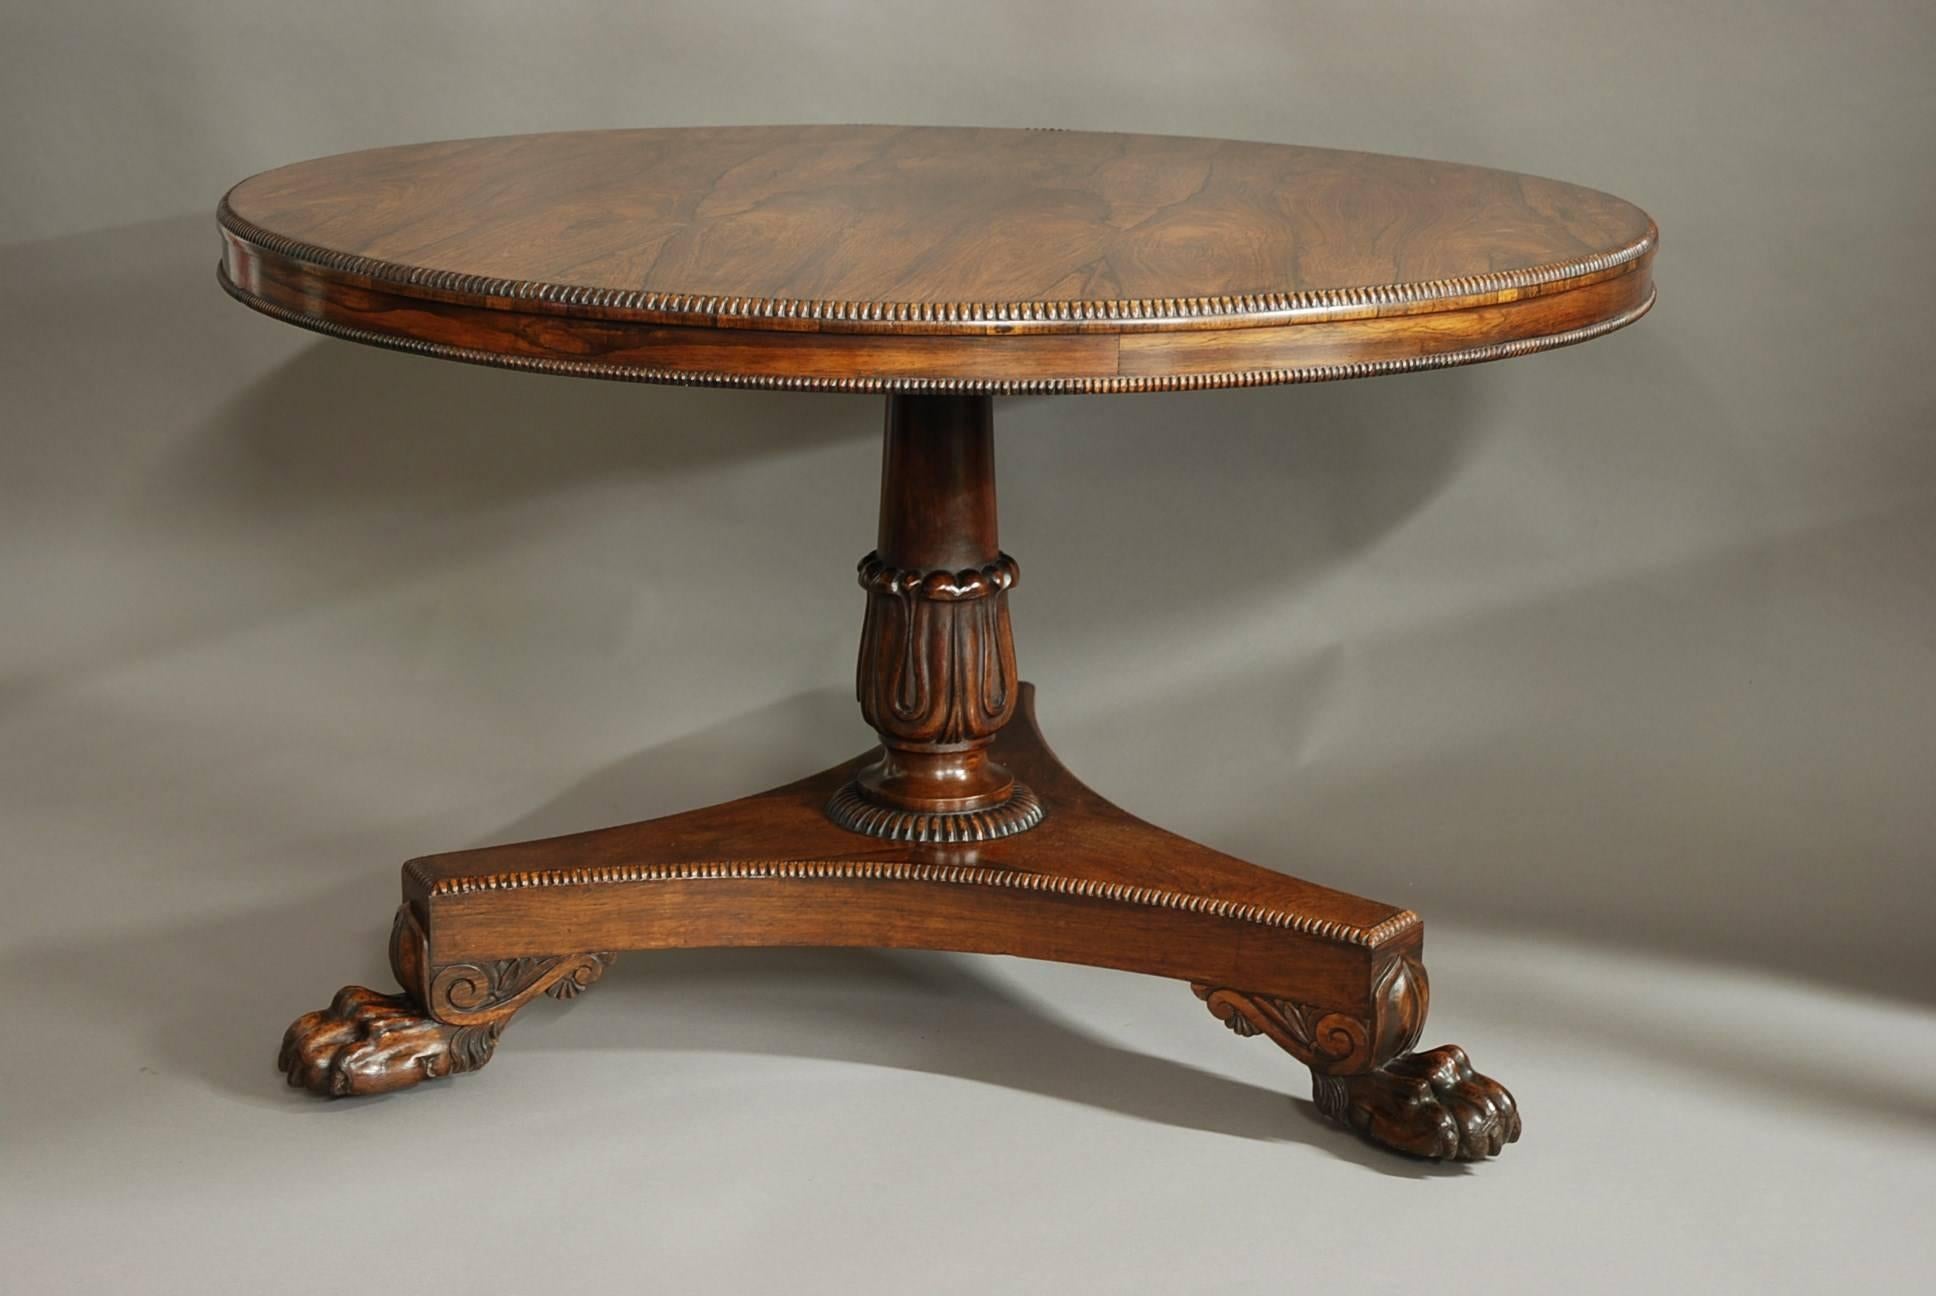 A good quality William IV superbly figured rosewood breakfast table. 

The top is mirror veneered with superbly figured rosewood with a turned moulding, leading down to a veneered frieze and further turned moulding.

The central column is